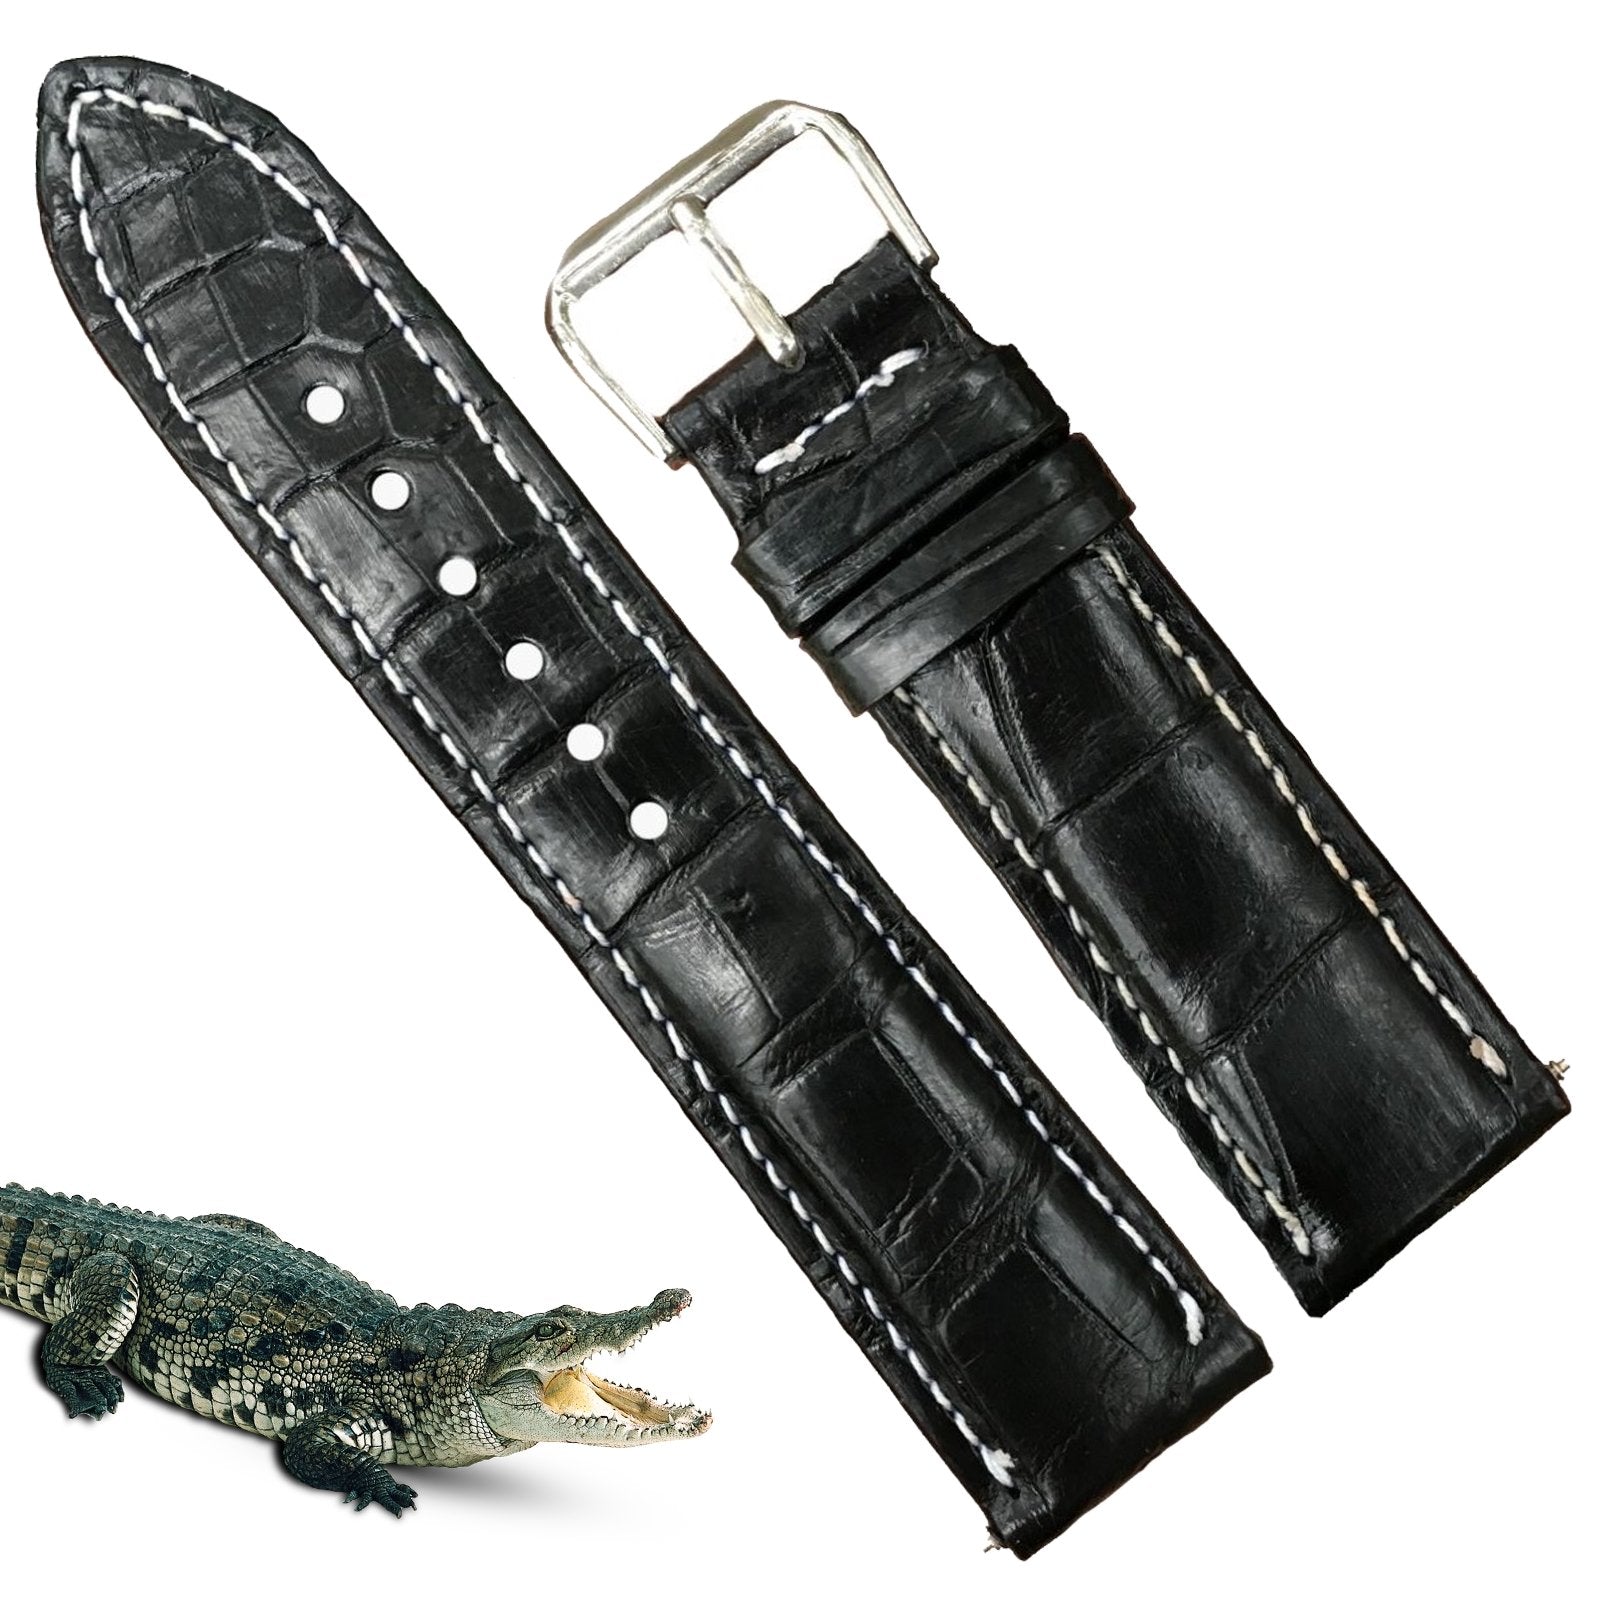 Black Alligator Leather Watch Band For Men | Premium Crocodile Quick Release Replacement Wristwatch Strap | DH-53 - Vinacreations